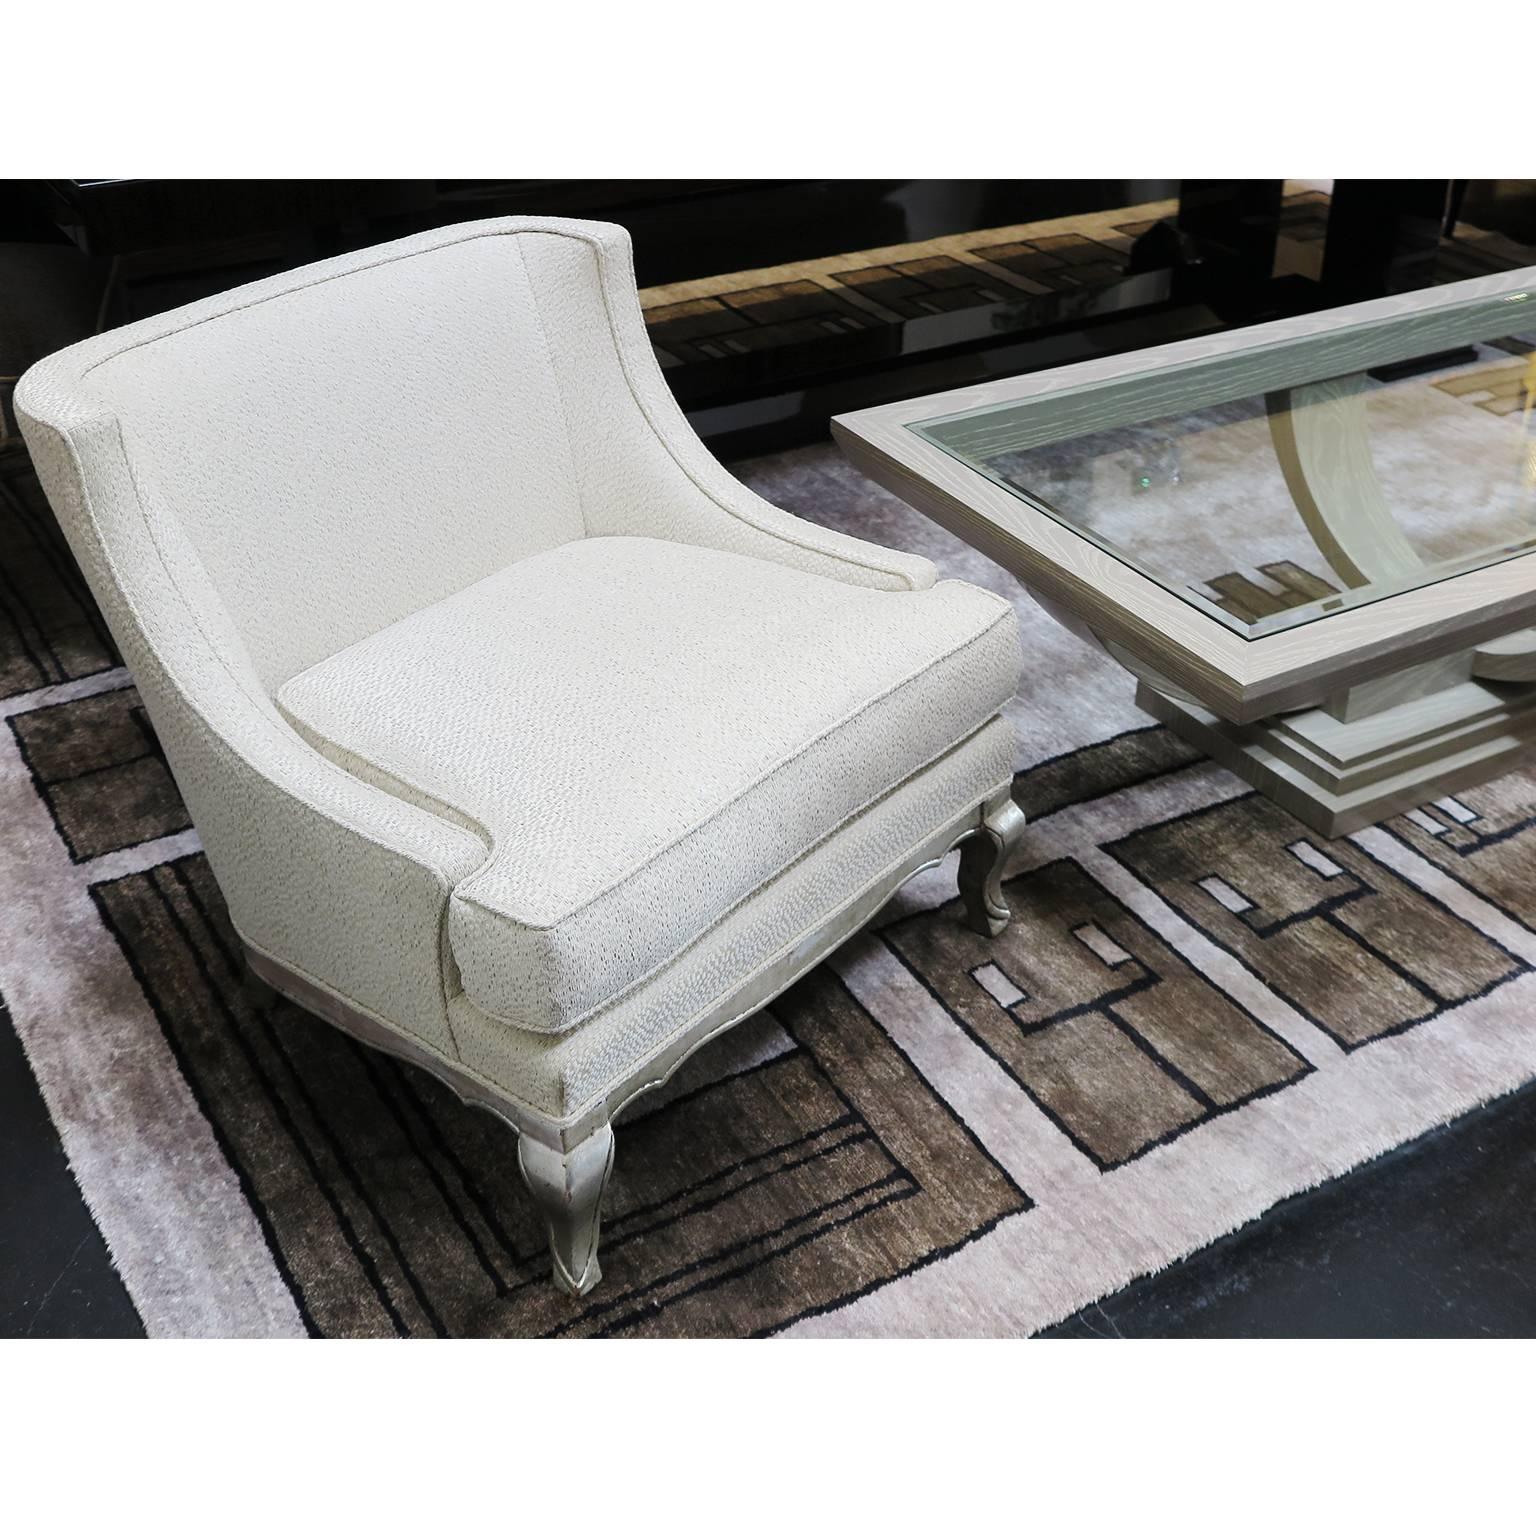 Pair of Midcentury Ivory Linen and Silk Lounge Chairs, USA, circa 1950s For Sale 6